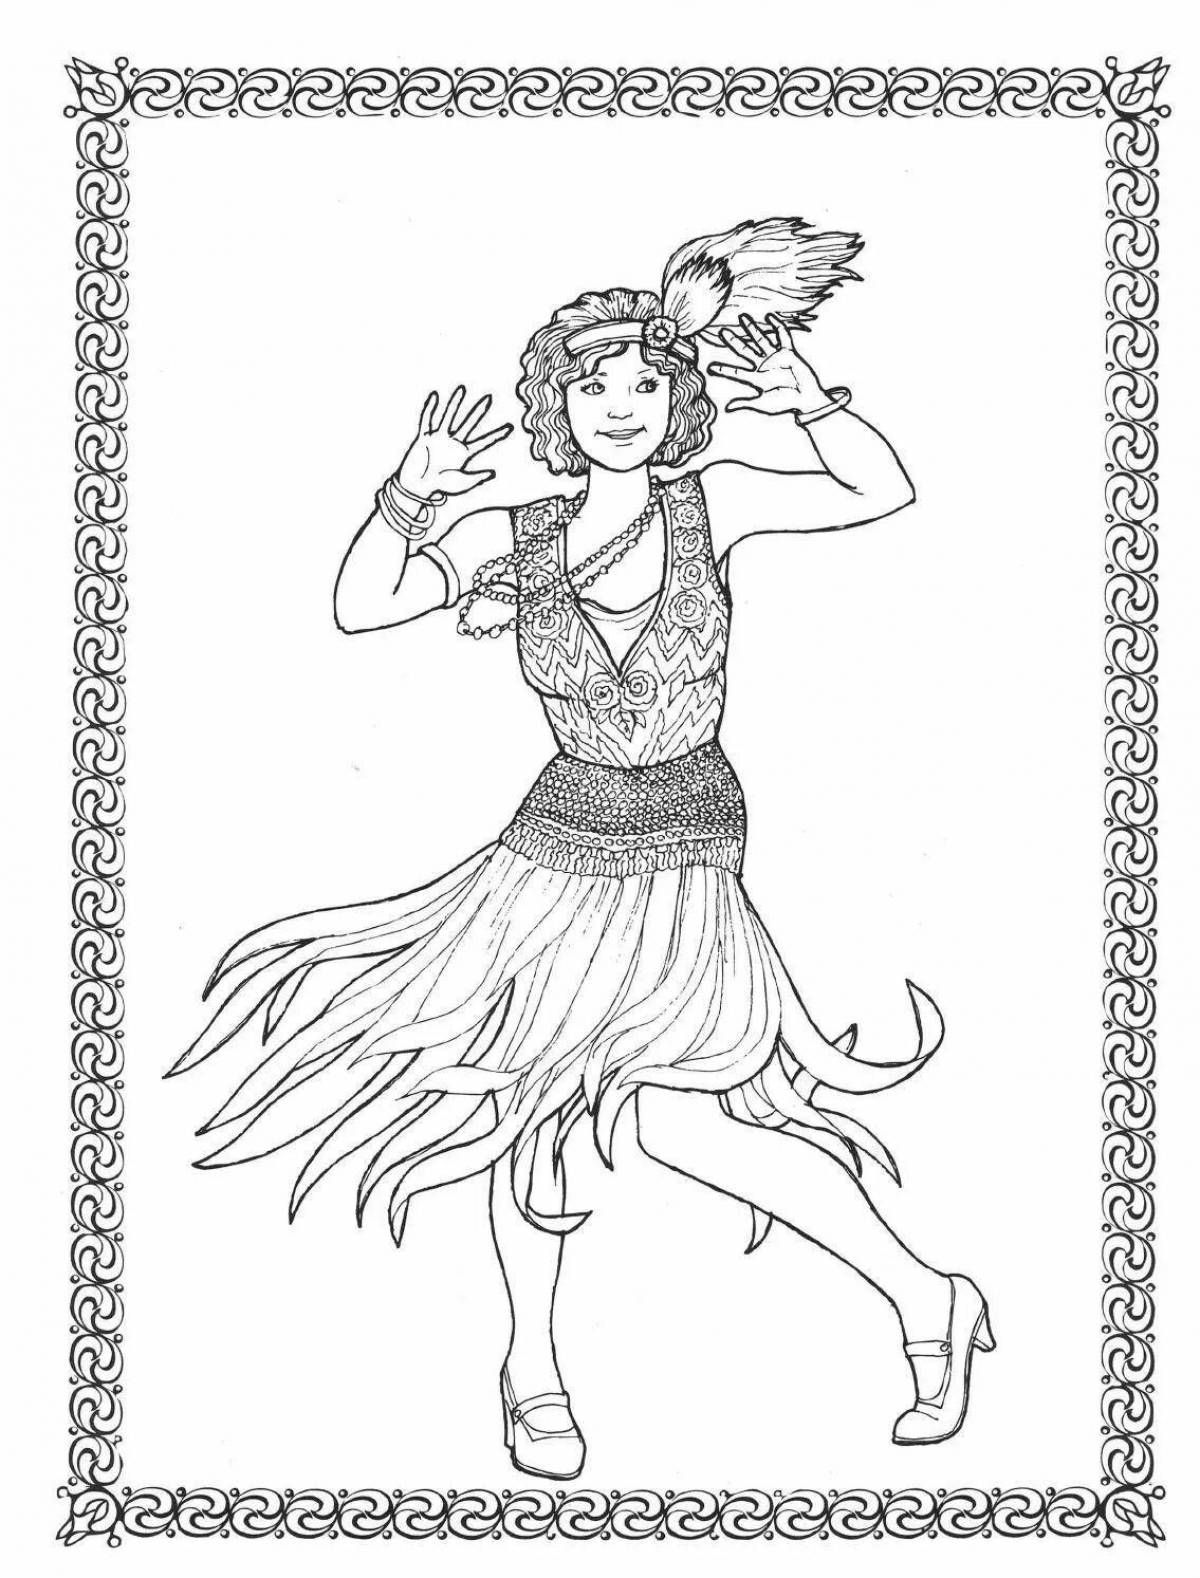 Coloring page exciting folk dance